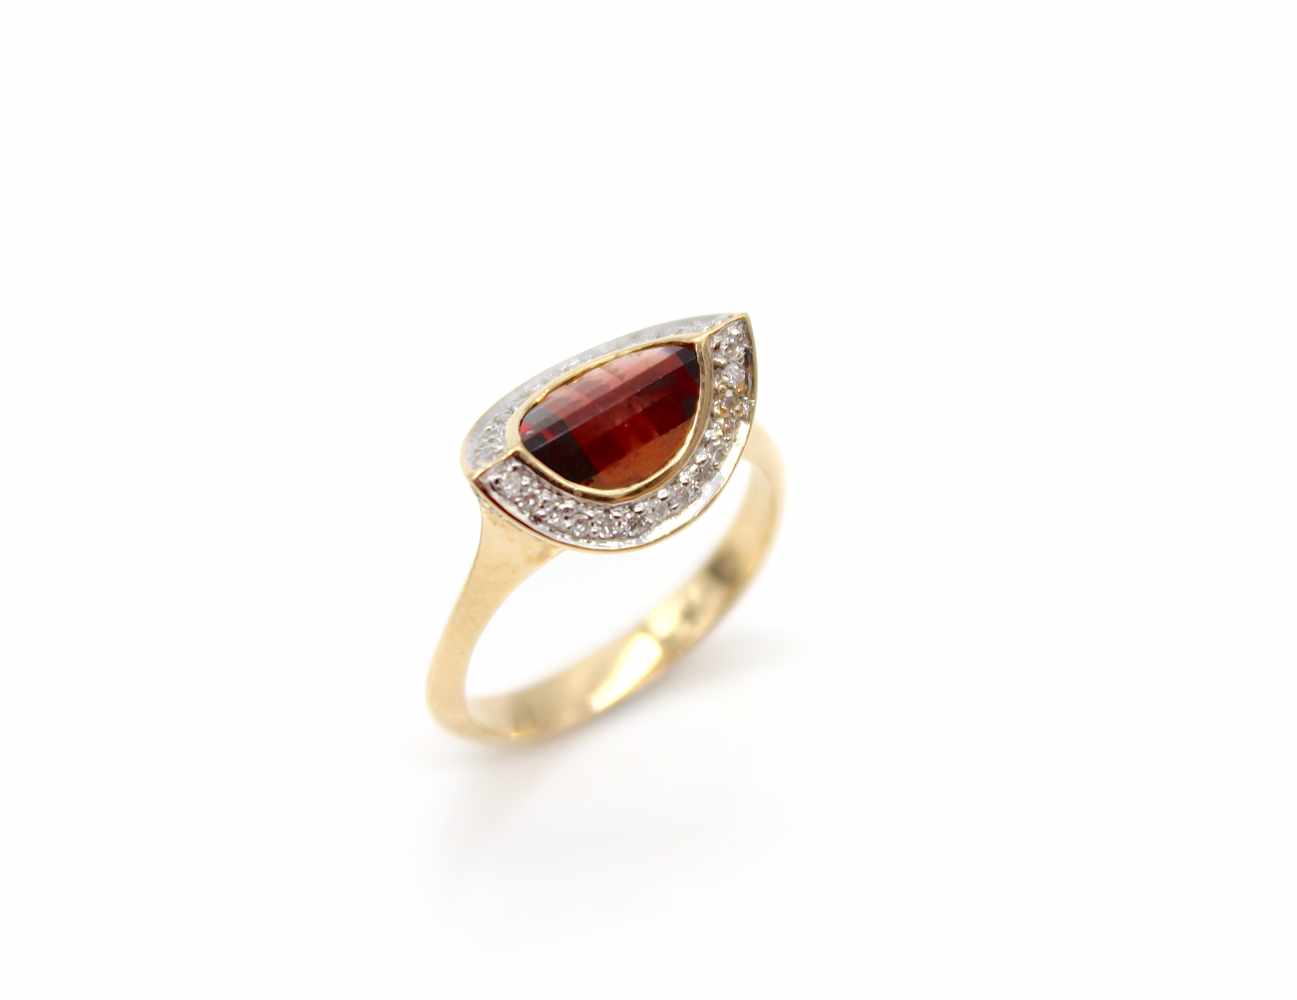 Ring made of 585 gold with a garnet and small diamonds.Weight 5 g, size 56- - -15.00 % buyer's - Image 2 of 4